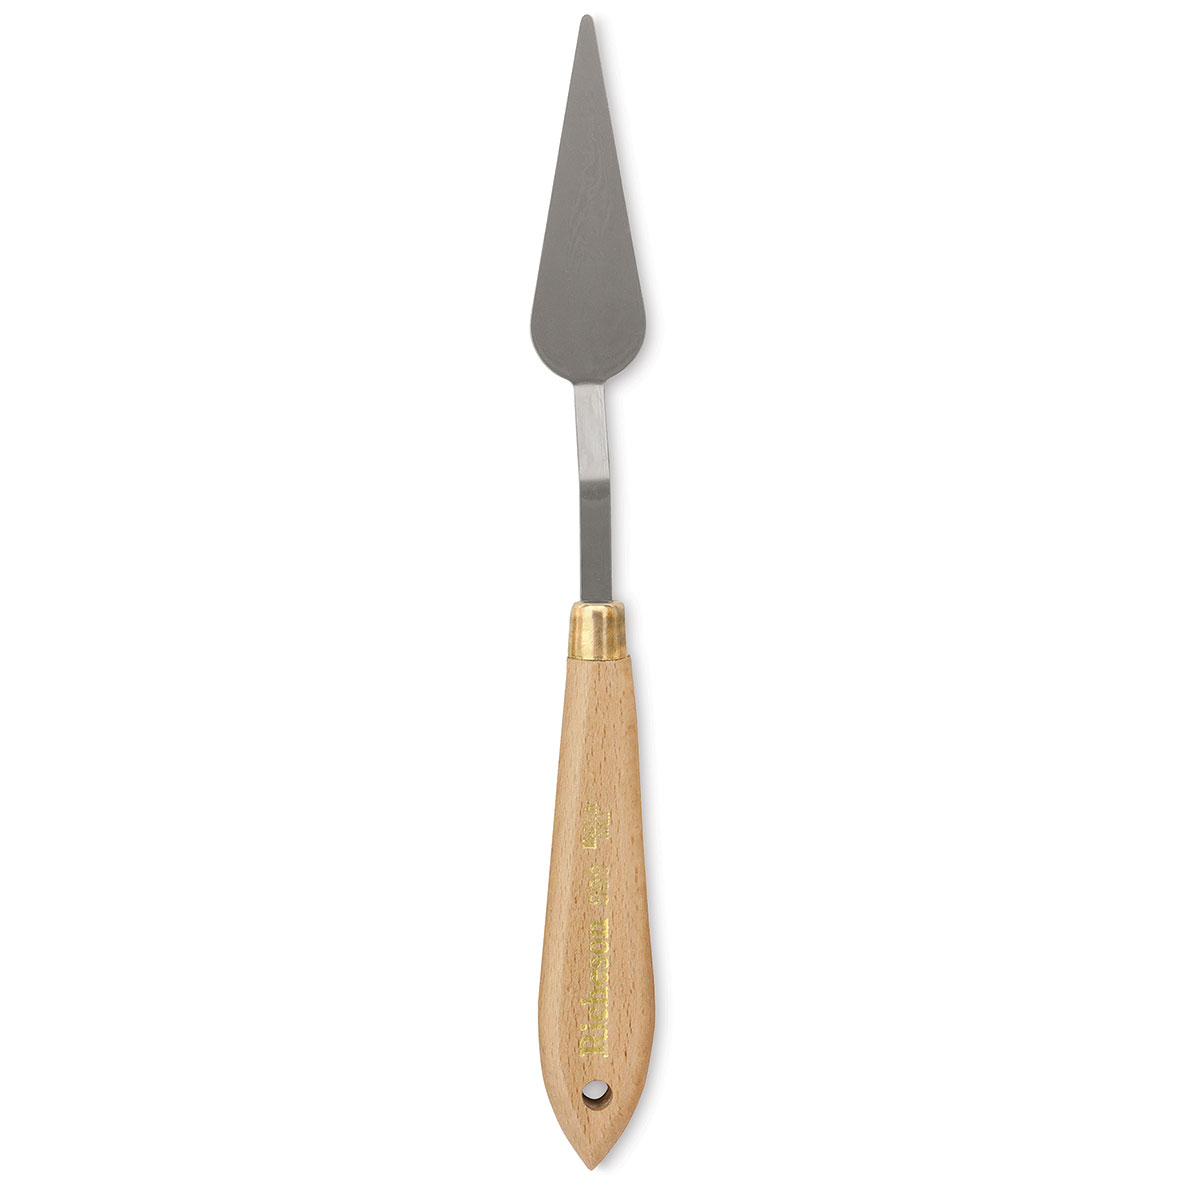 Richeson Stainless Steel Painting & Palette Knives - High quality